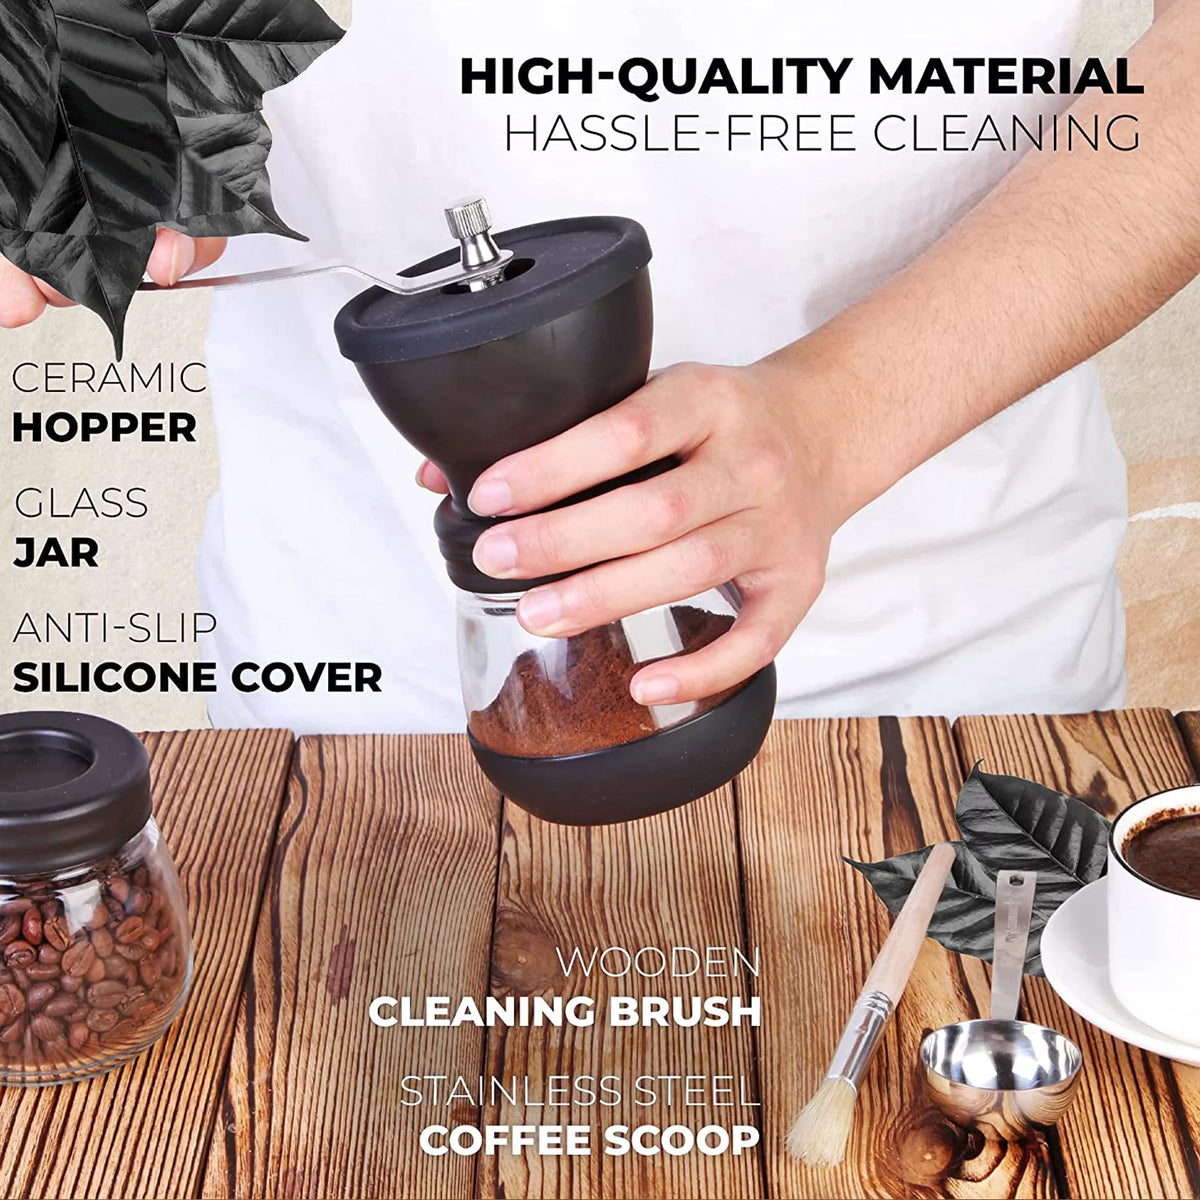 Manual Coffee Grinder with Ceramic Burr for Beans, Espresso, and Spices - Portable Hand Crank Mill with 2 Glass Jars (11oz Each)